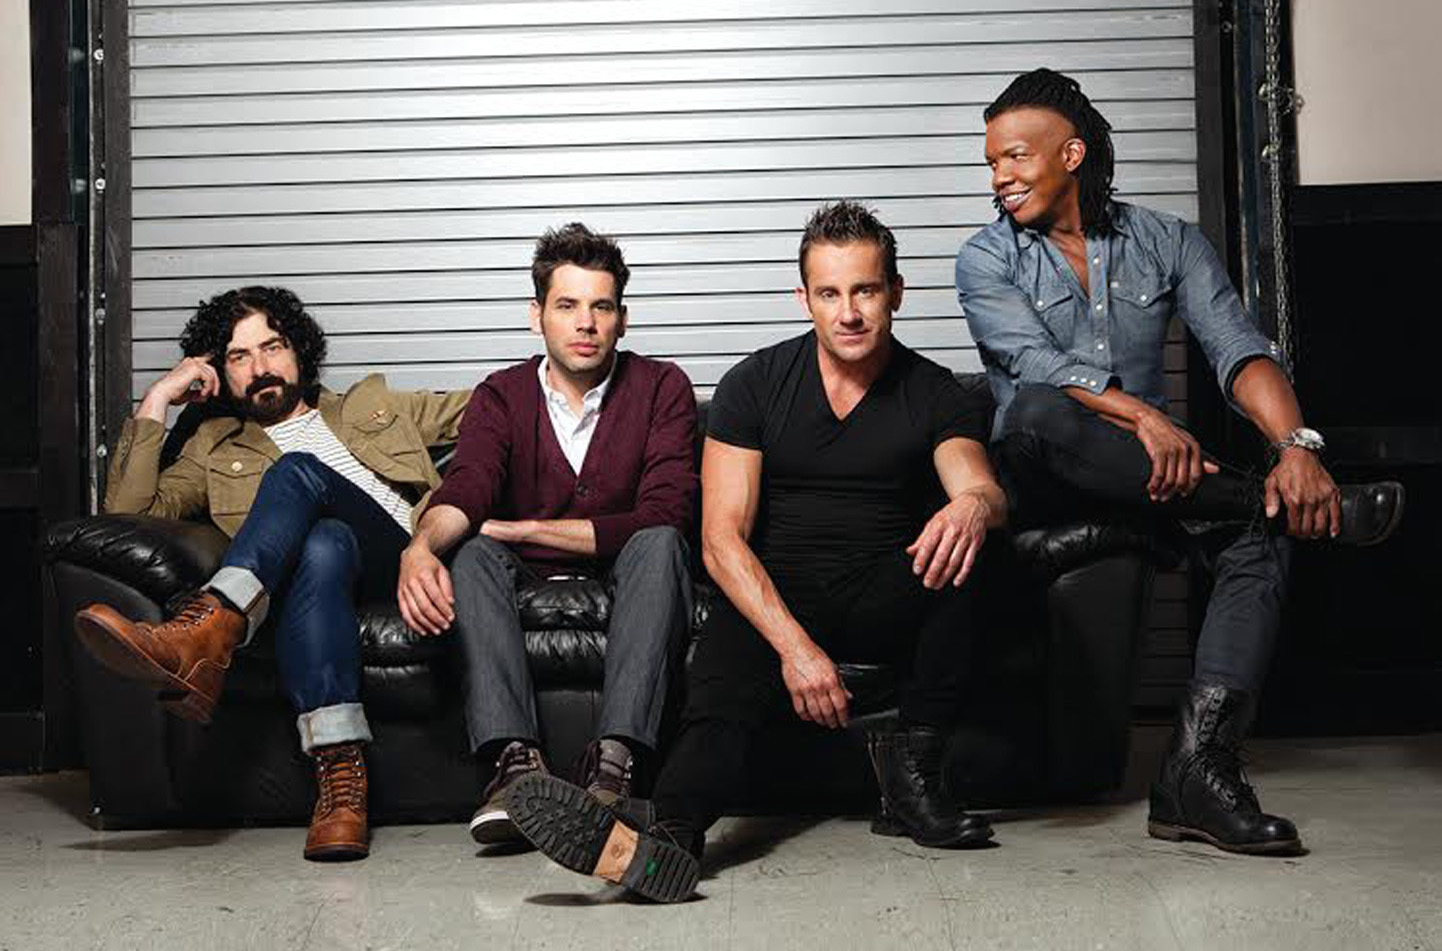  Newsboys Sign With Fairtrade Services Ahead Of New Album In March